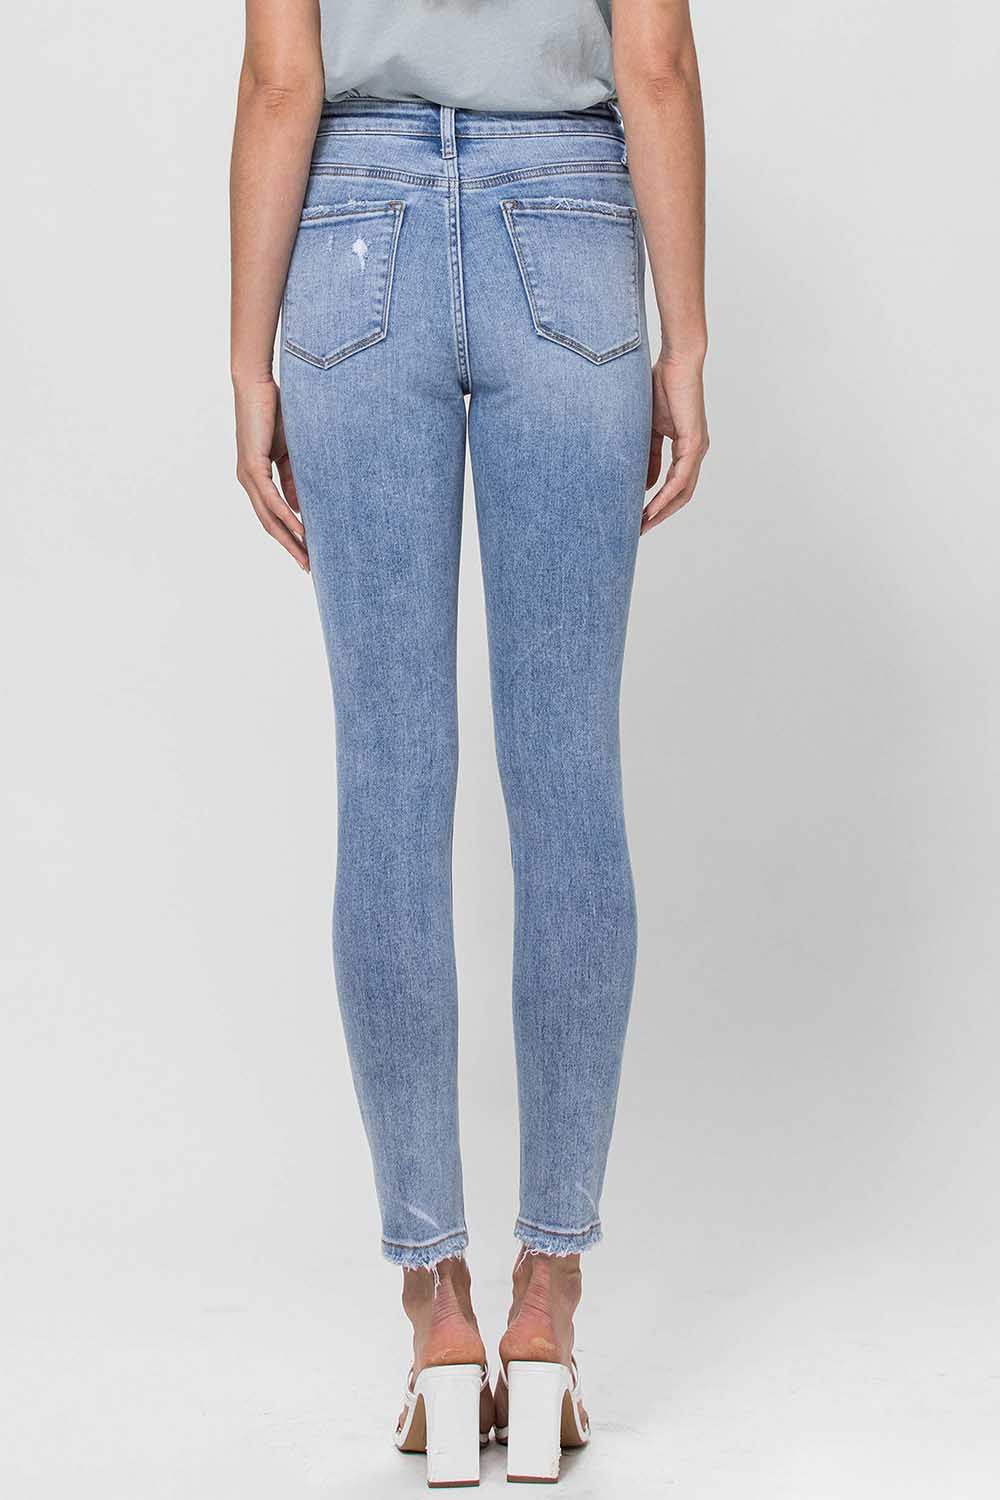 90s High Rise Skinny Jeans in Light Wash